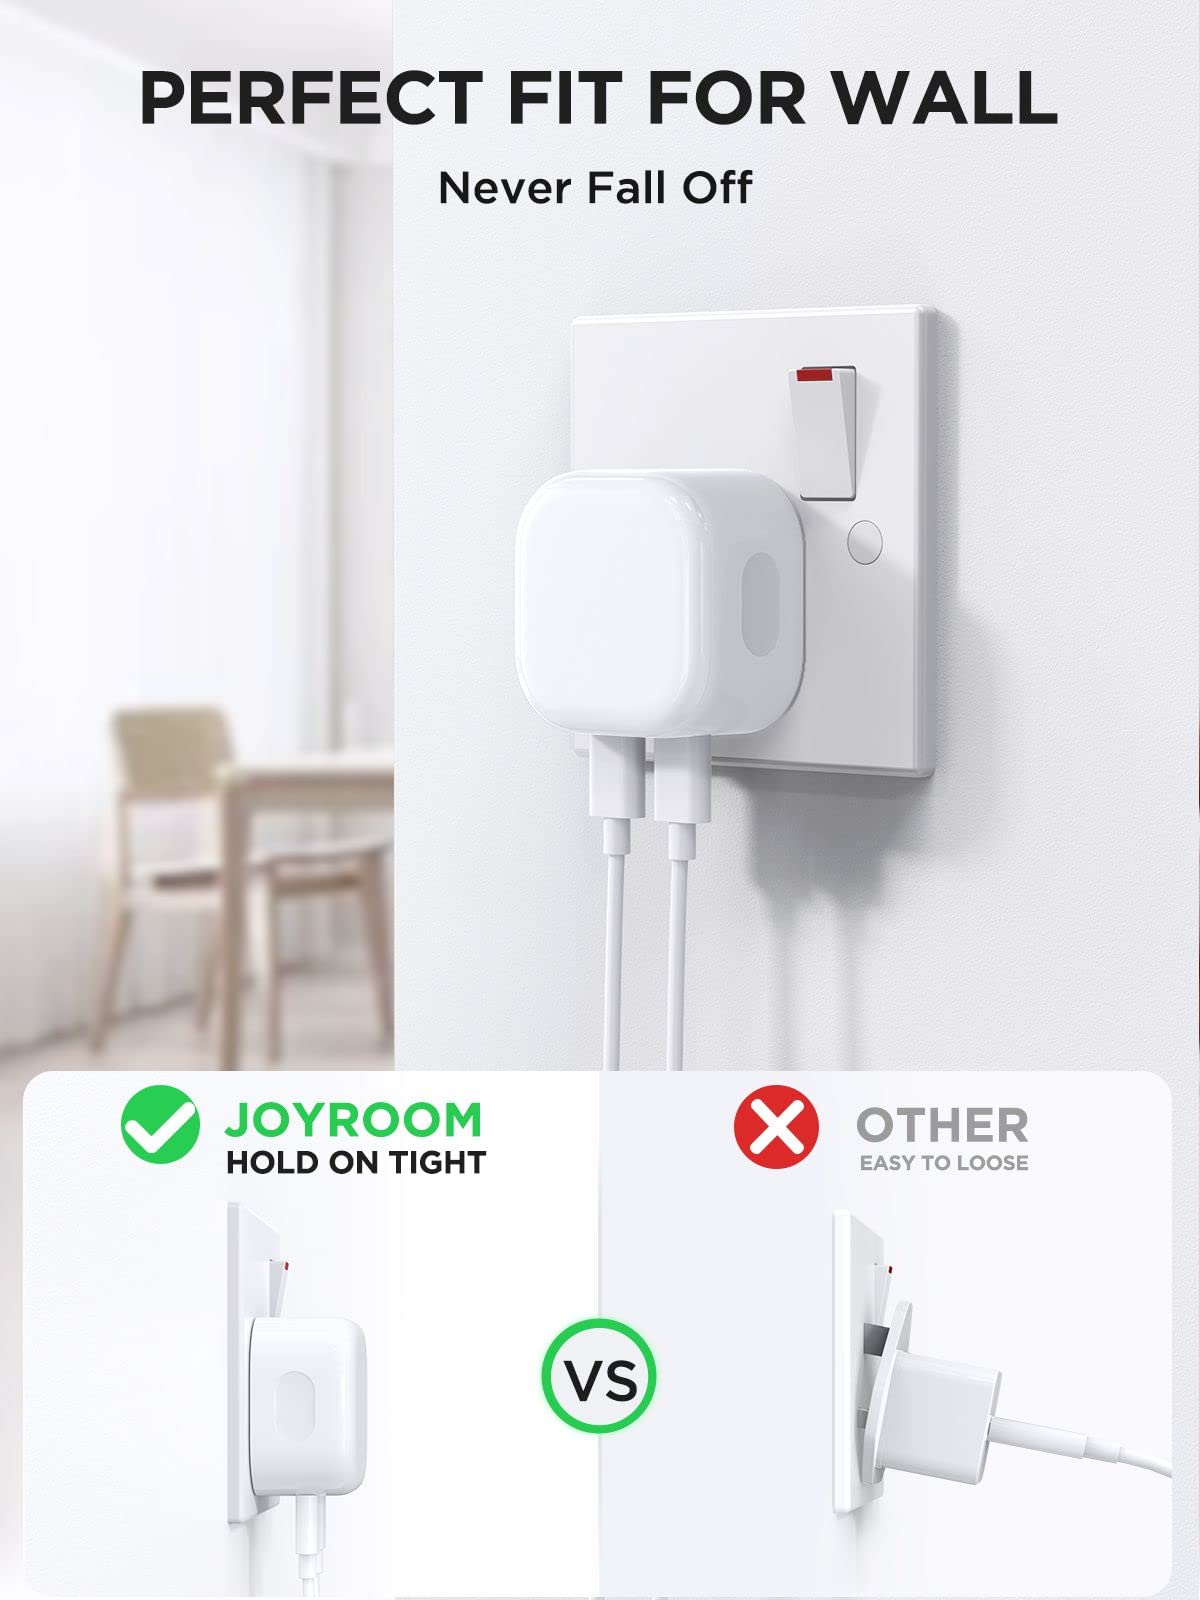 JOYROOM 35W USB C Fast Charger Plug, Dual USB‑C Port Power Adapter PD3.0 Wall Charger Compatible with iPhone 13/13 Pro/13 Pro Max/12/11/SE 3, iPad Pro, AirPods Pro, MacBook Air, Apple Watch etc